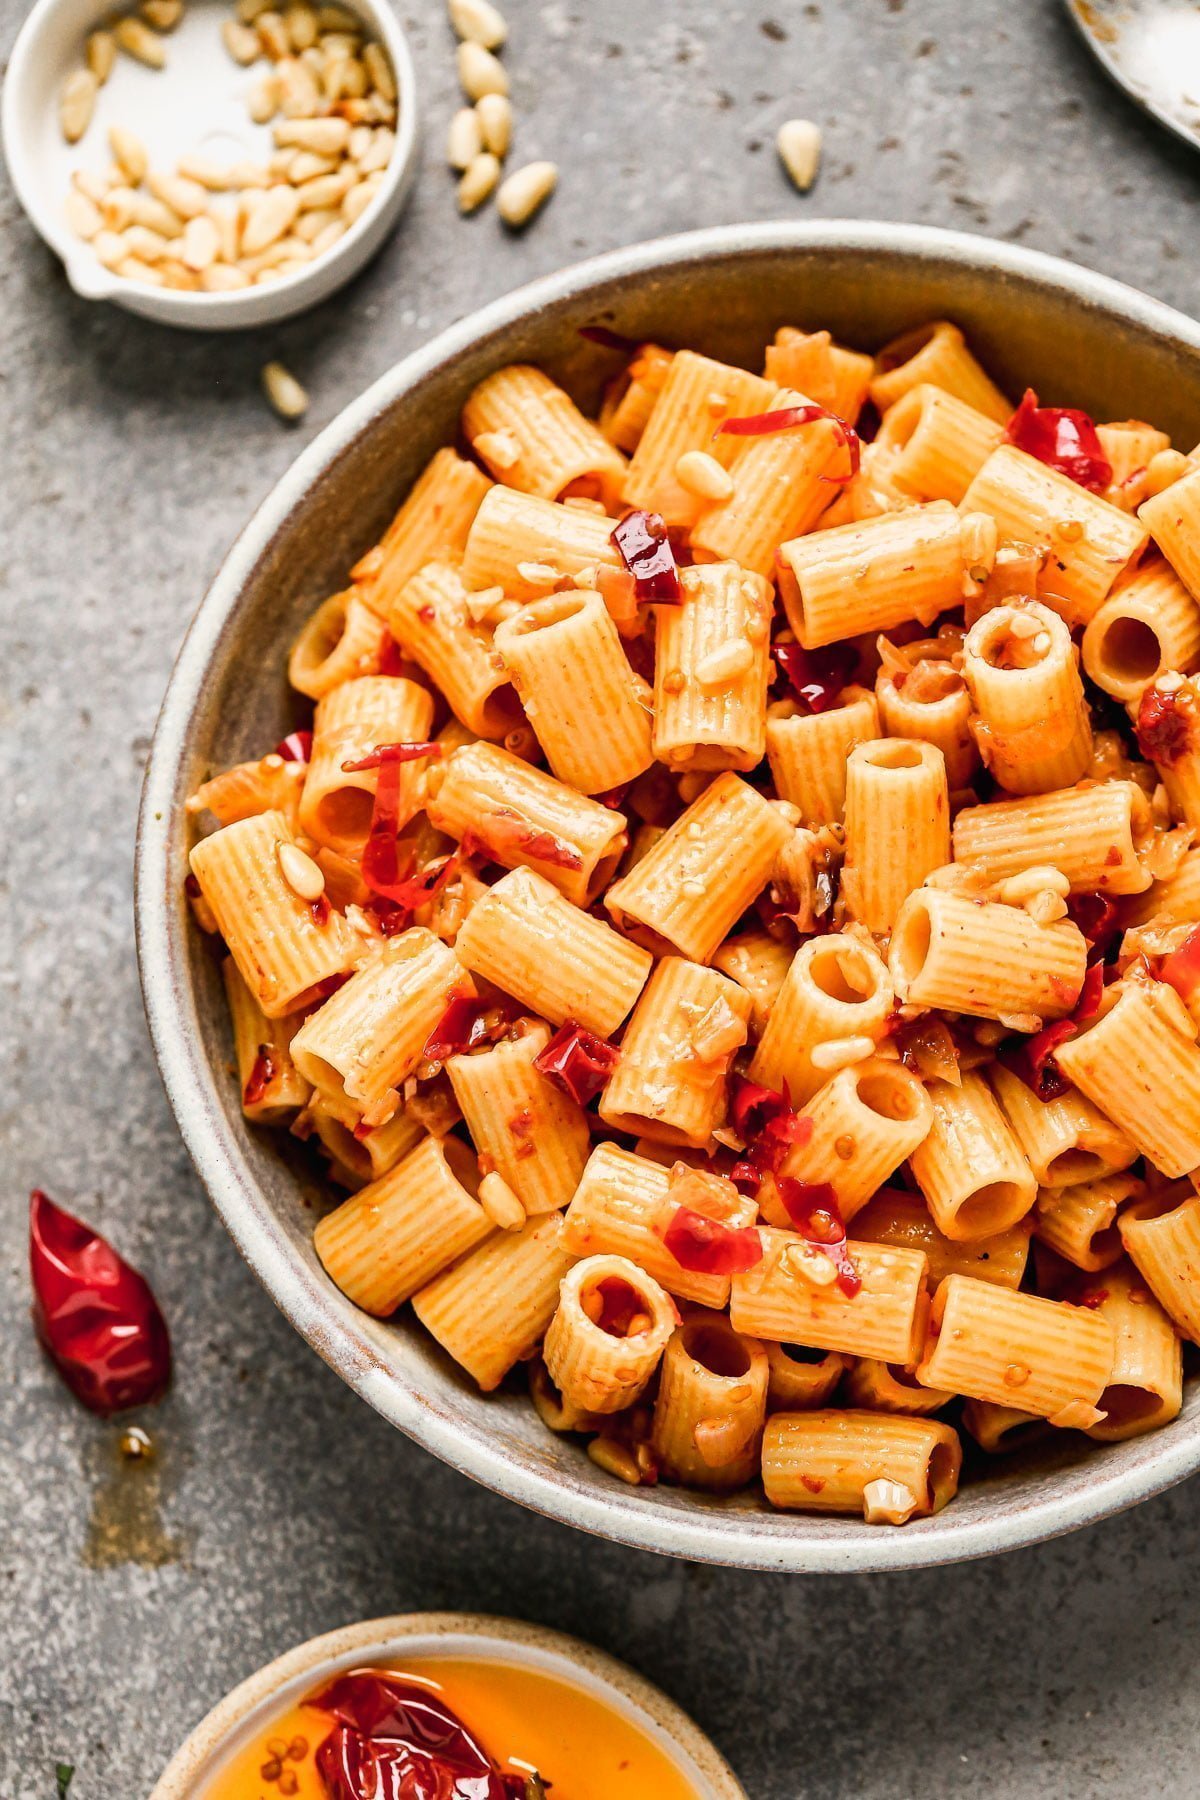 Calabrian Chili Pasta: This simple pasta requires just six ingredients and despite the minimal ingredient list, the flavor is next level with ultra spicy Calabrian chilis, nutty parmesan cheese, and a heavy hand of garlic. 